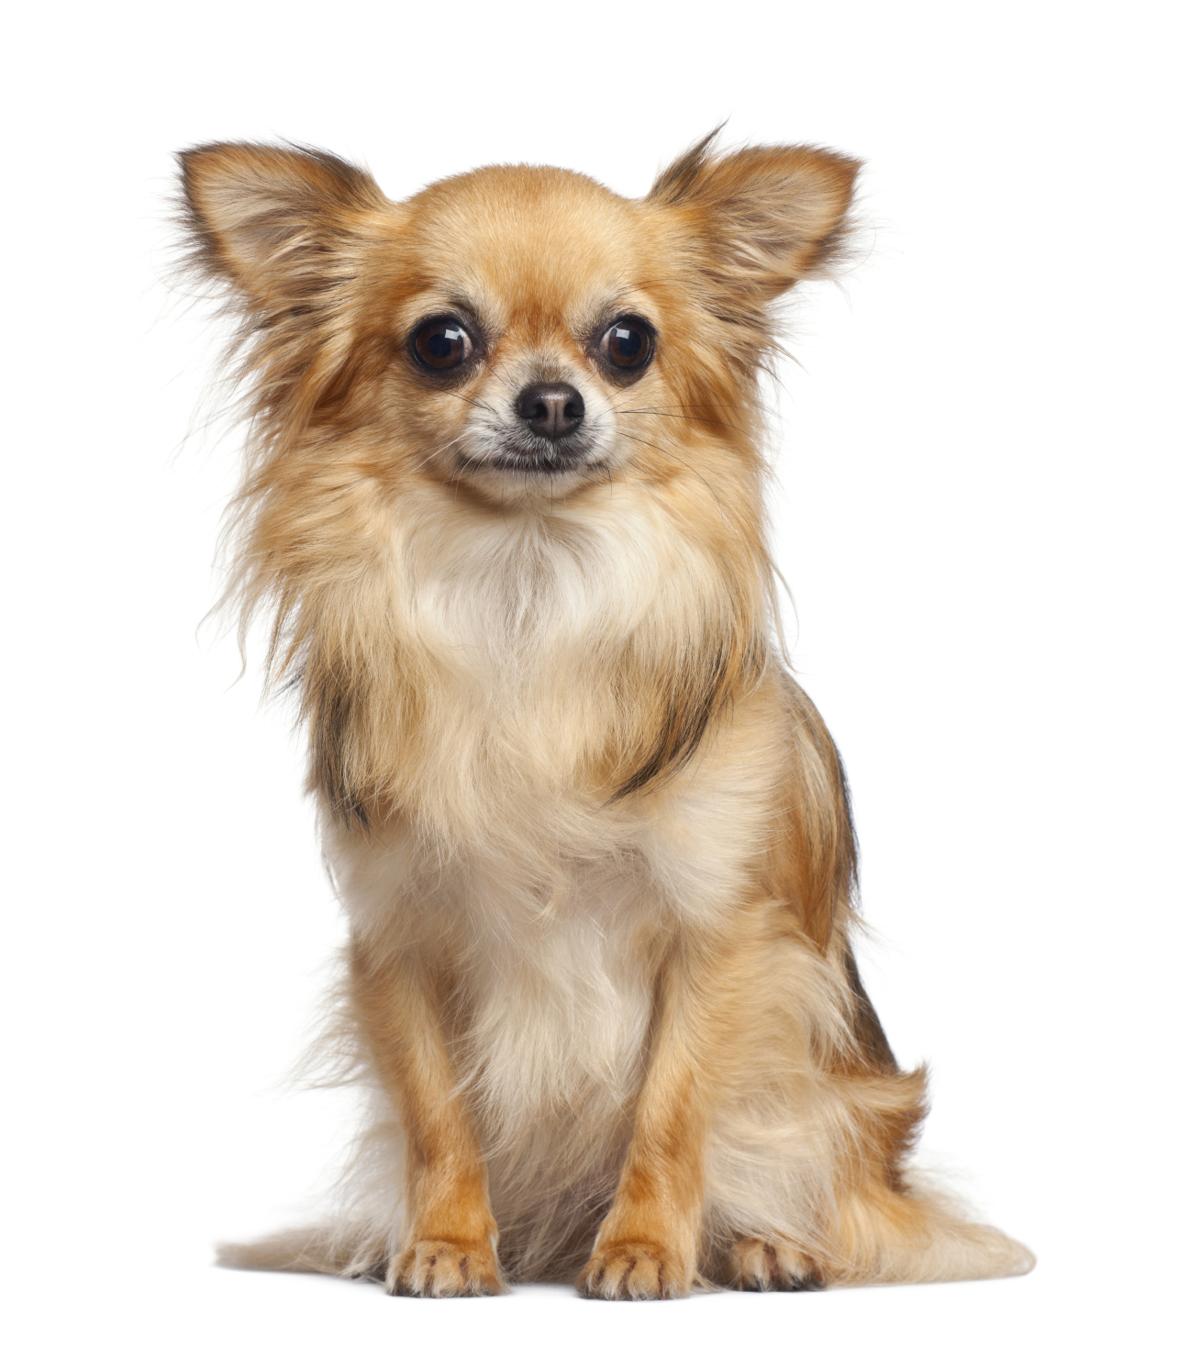 Information About The Delicately Cute Apple Head Chihuahuas